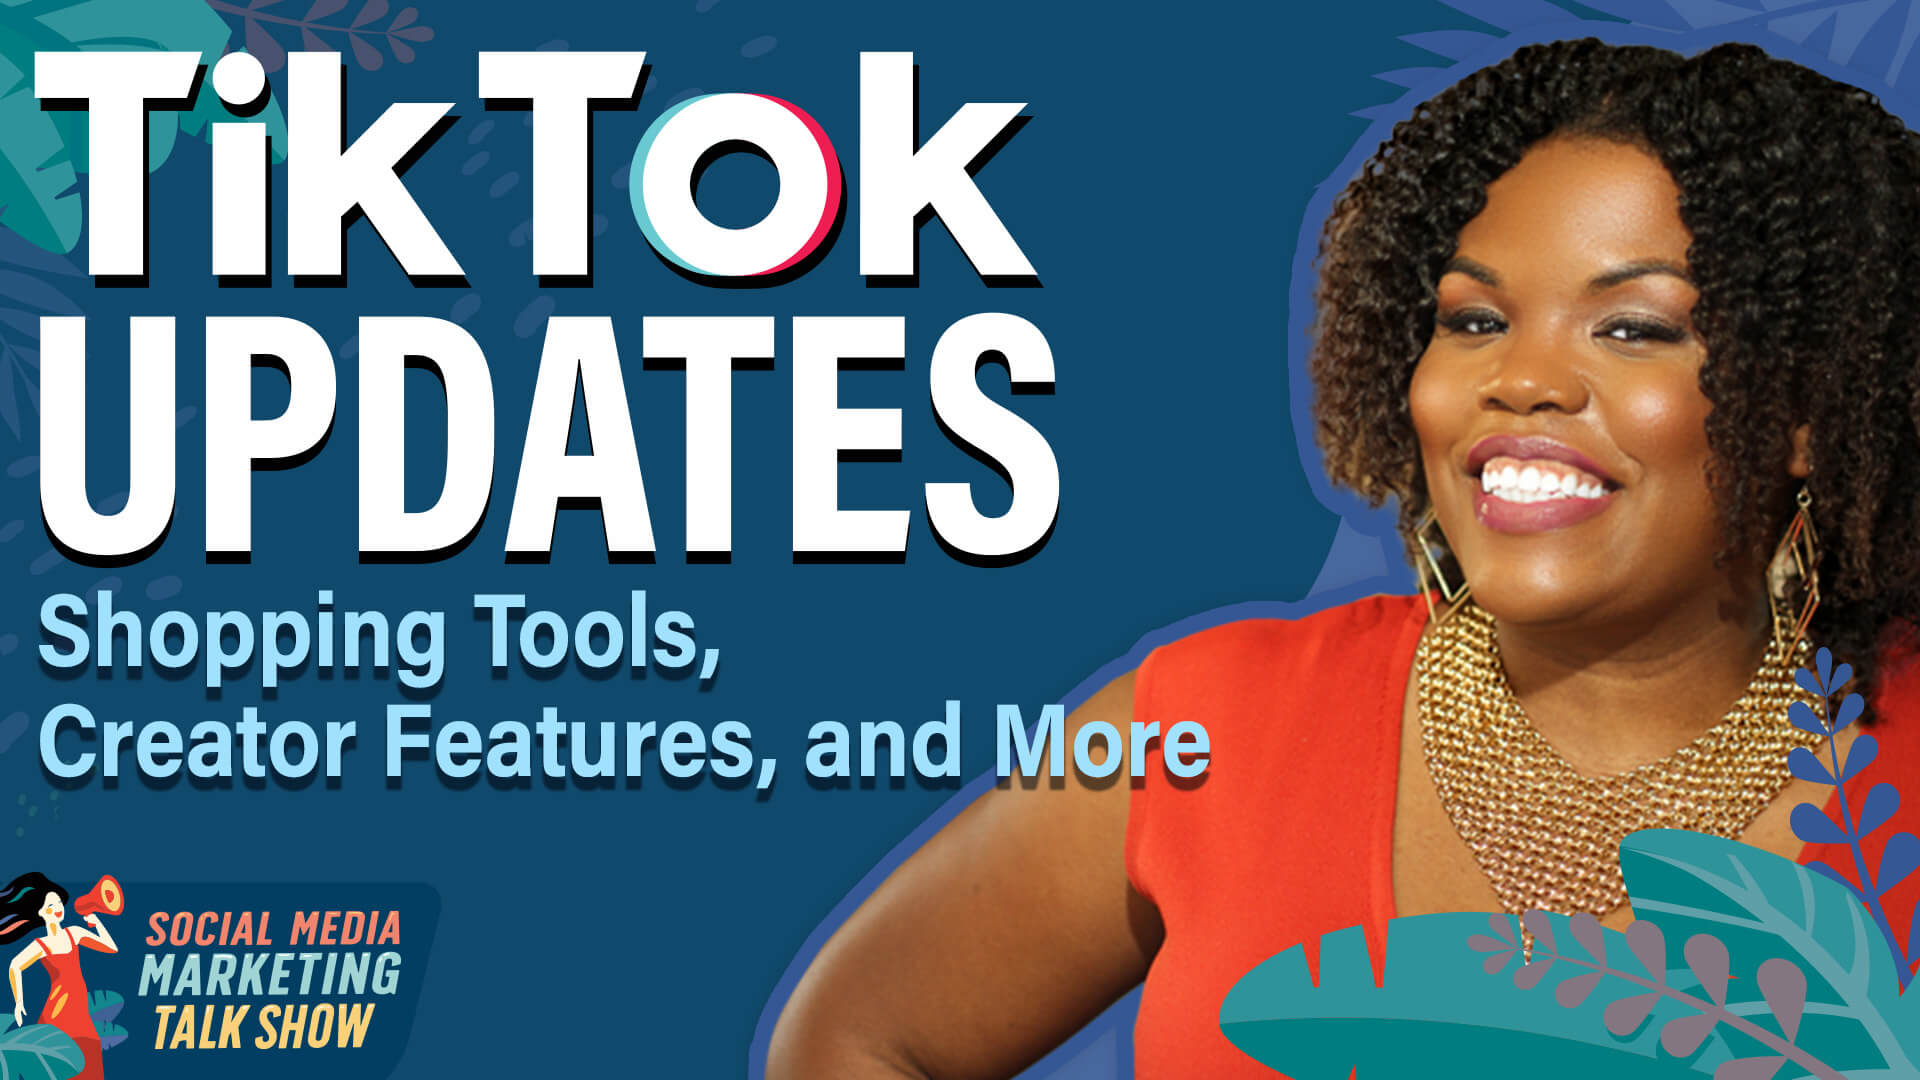 TikTok Updates: Shopping Tools, Creator Features, and More by Social Media Examiner